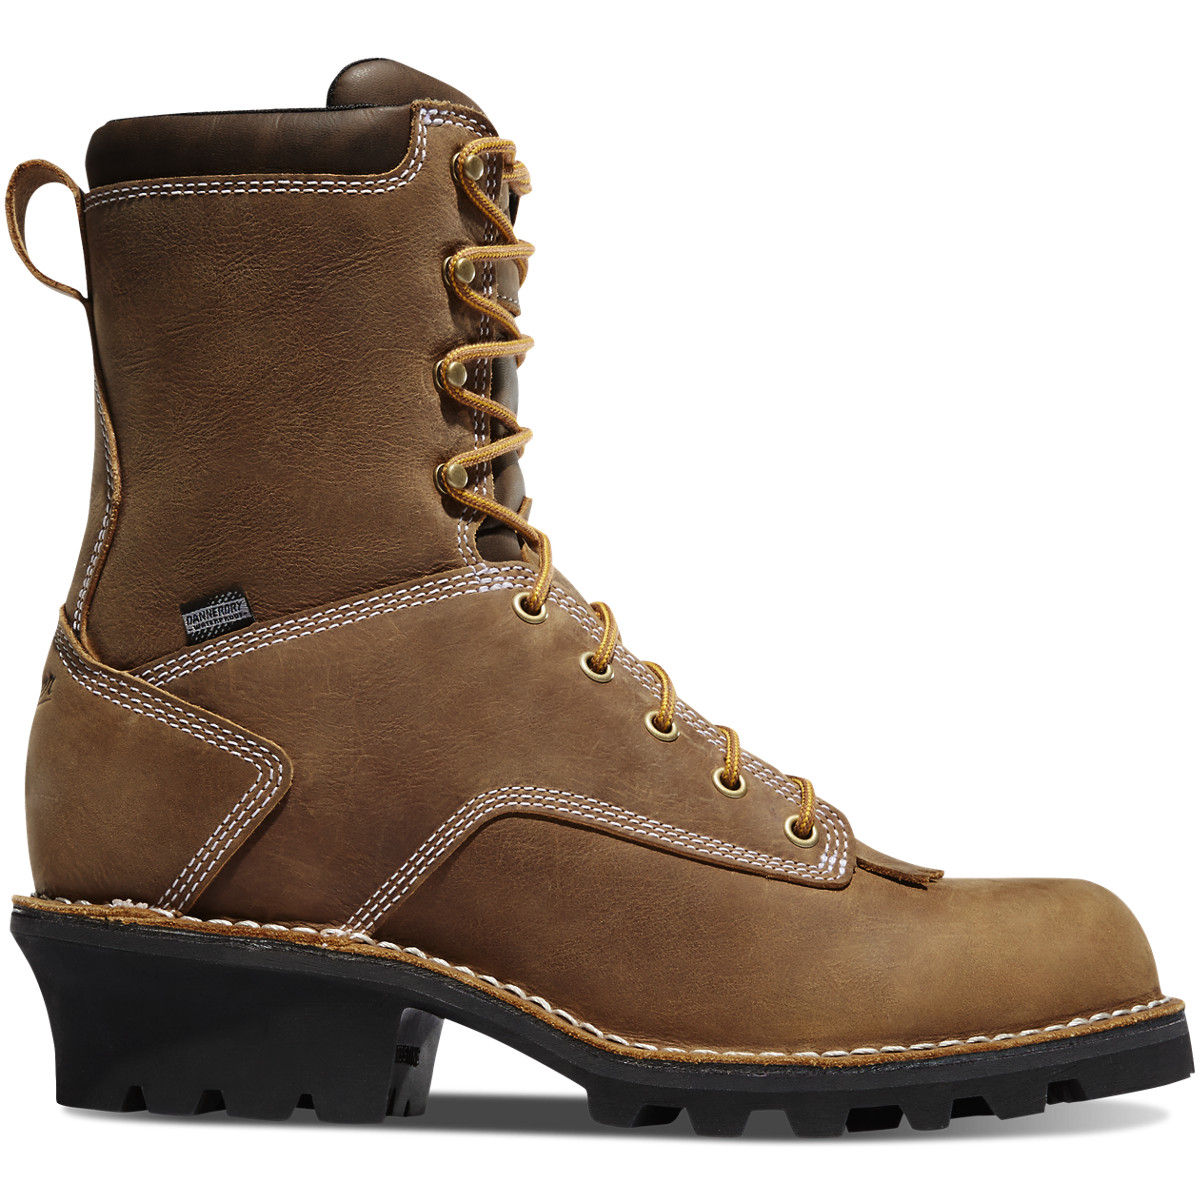 danner insulated boots